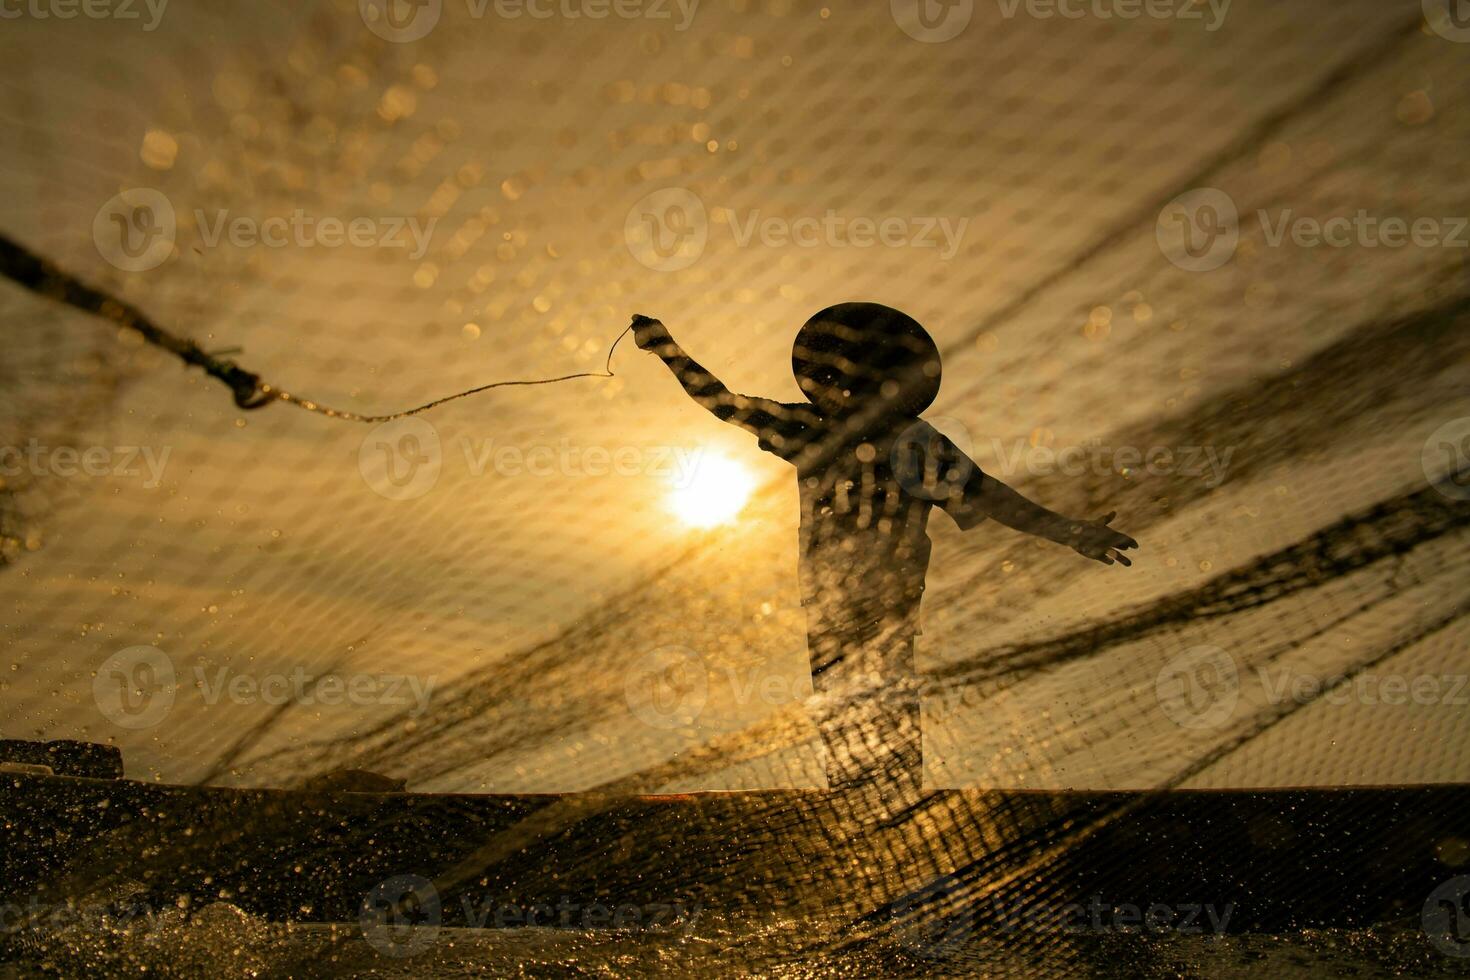 Silhouette of fisherman at sunrise, Standing aboard a rowing boat and casting a net to catch fish for food photo